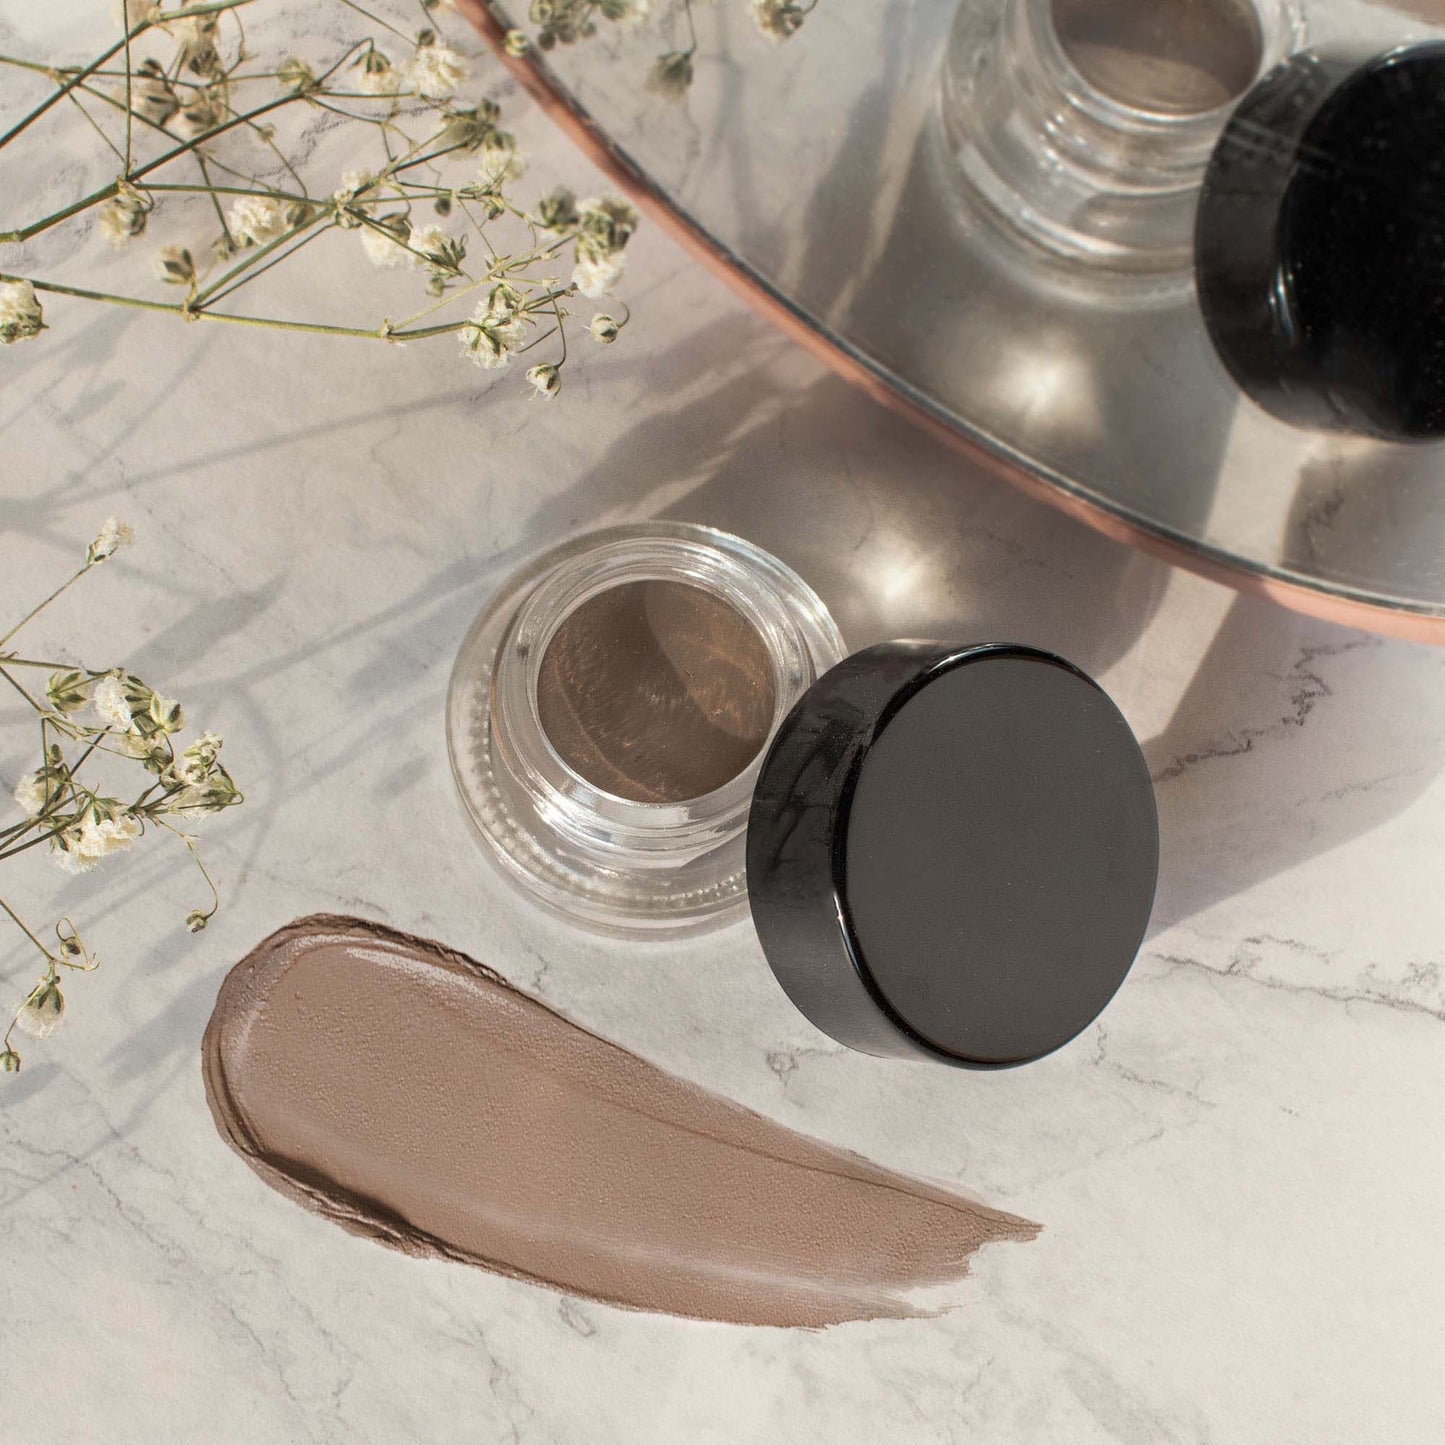 Enhance your brows with the highly adaptable formula of Cruisin Organics Tiramisu Brow Pomade. This product is ideal for controlling and perfecting your brows, providing a long-lasting, polished appearance that is especially suitable for oily skin types.